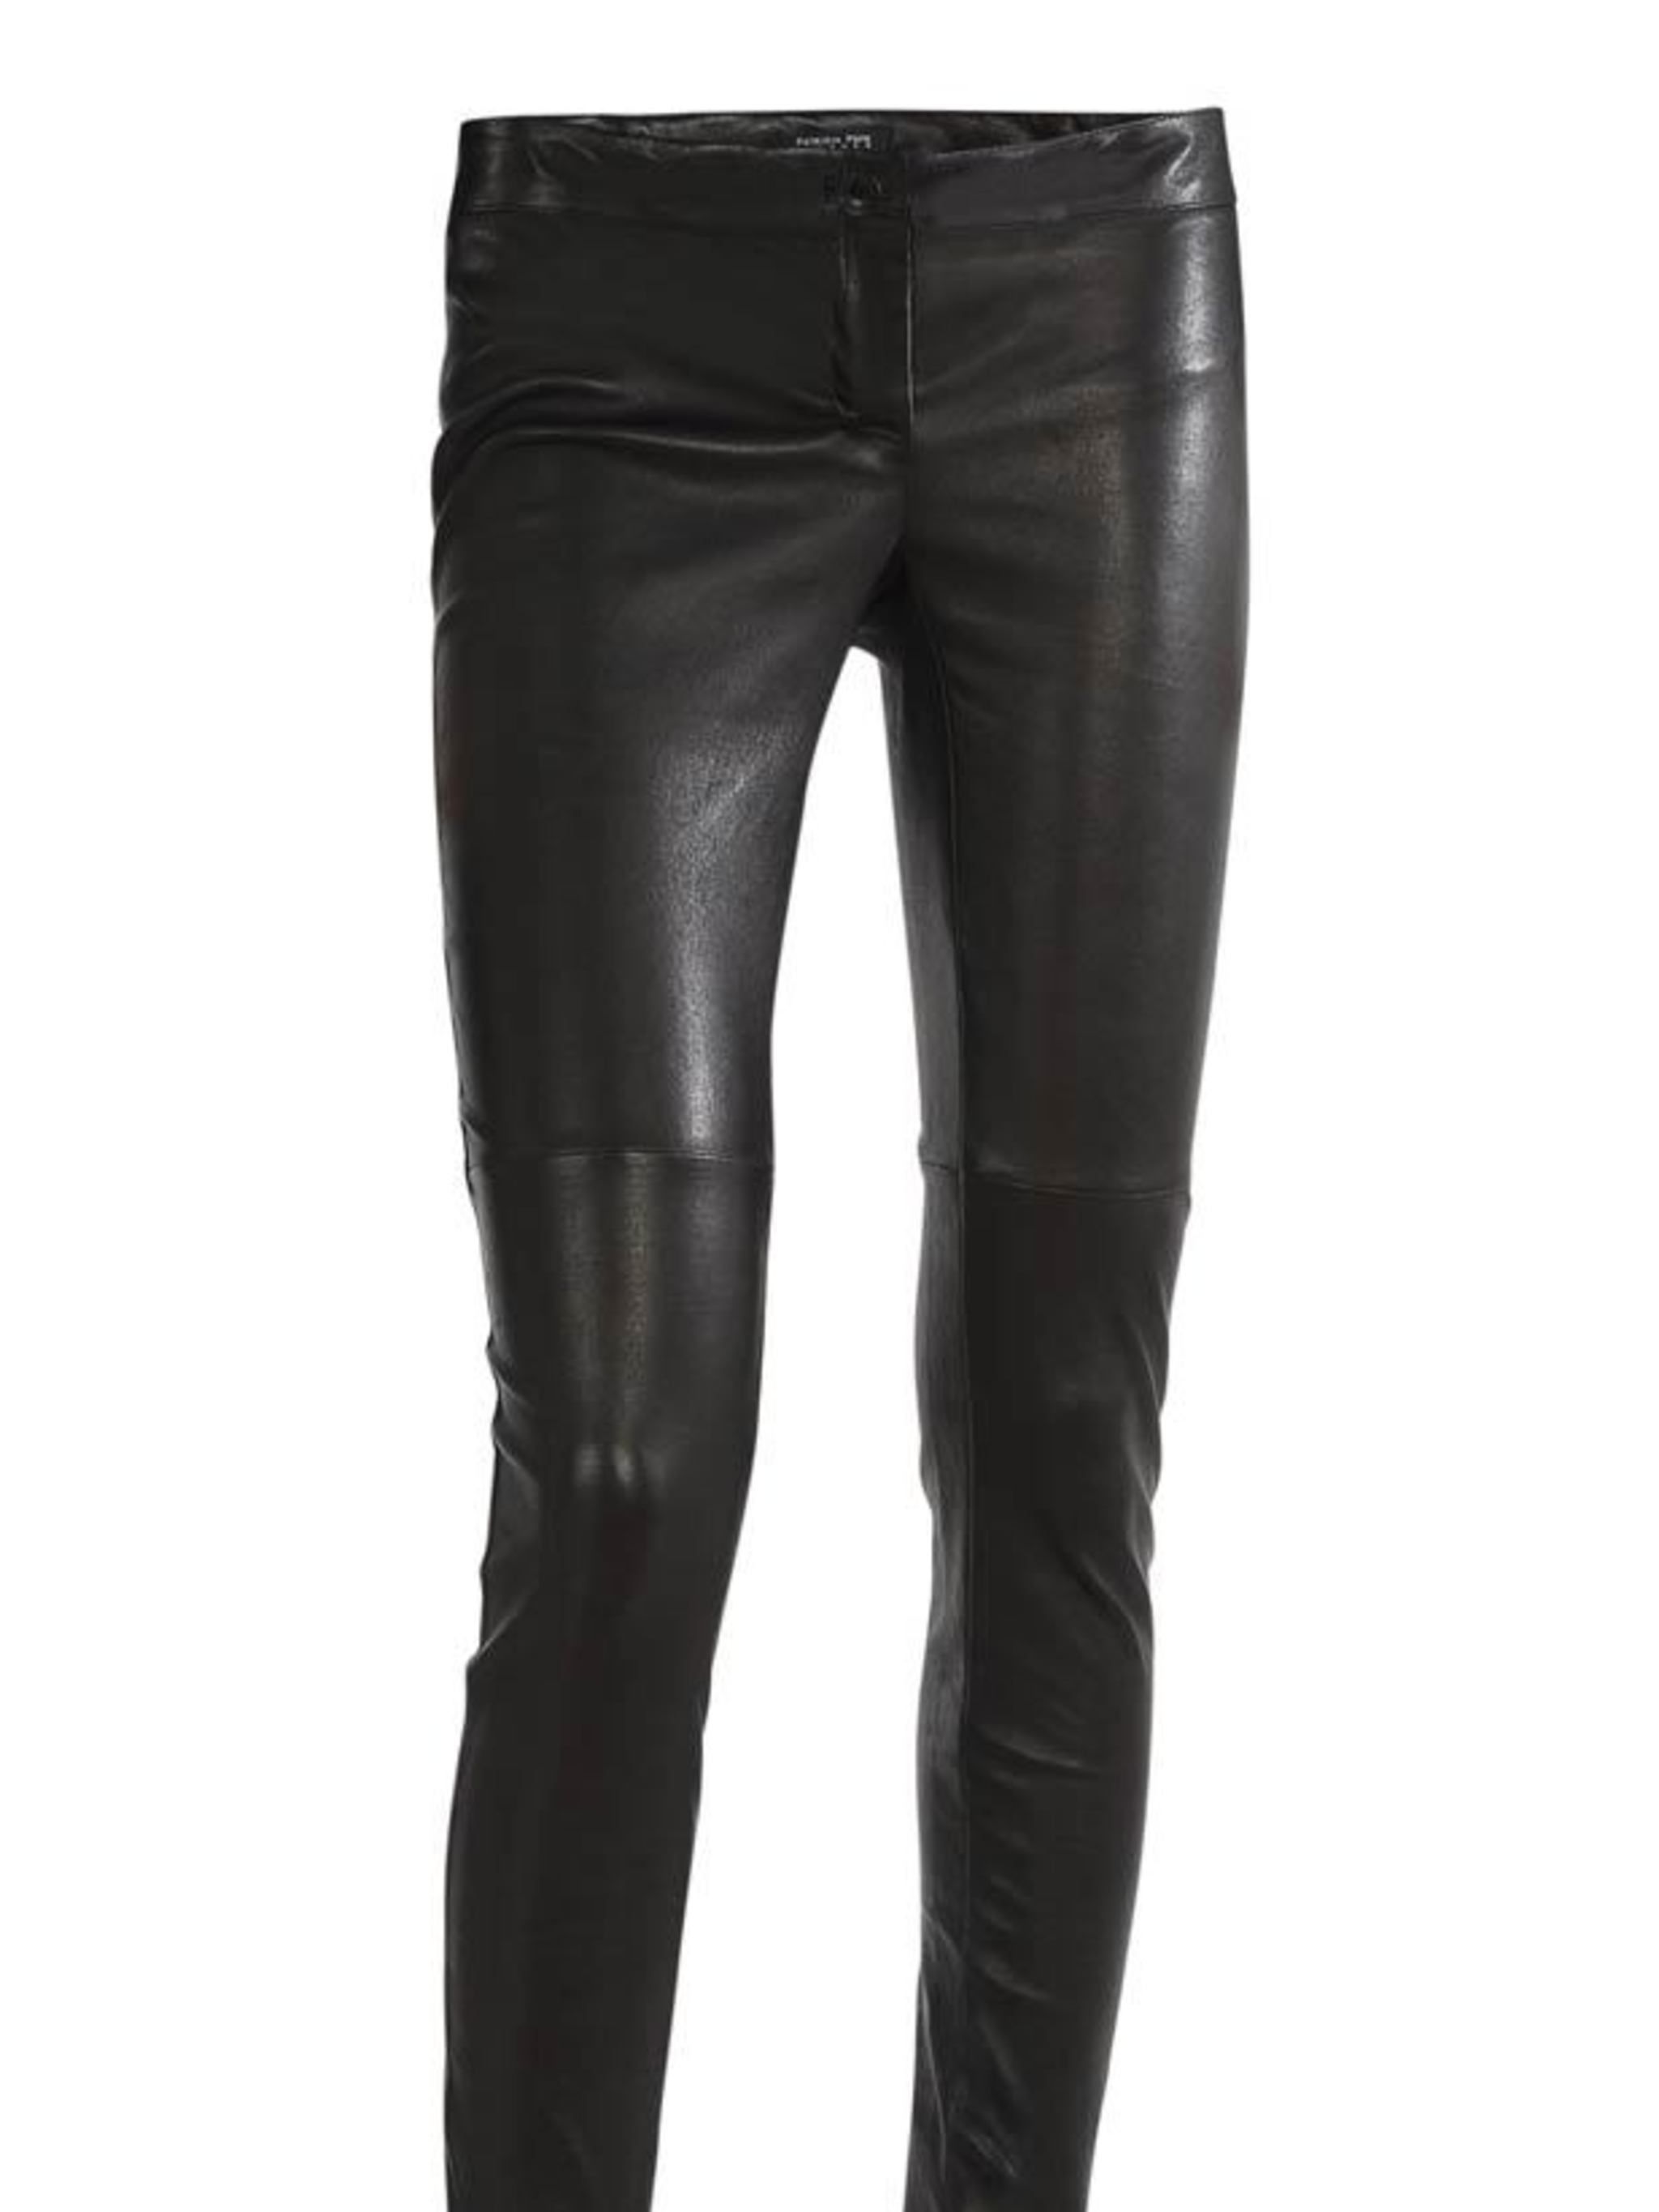 Black Leather Pants To Wear This Fall 2020  Black leather pants outfit  Black leather jeans Leather pants